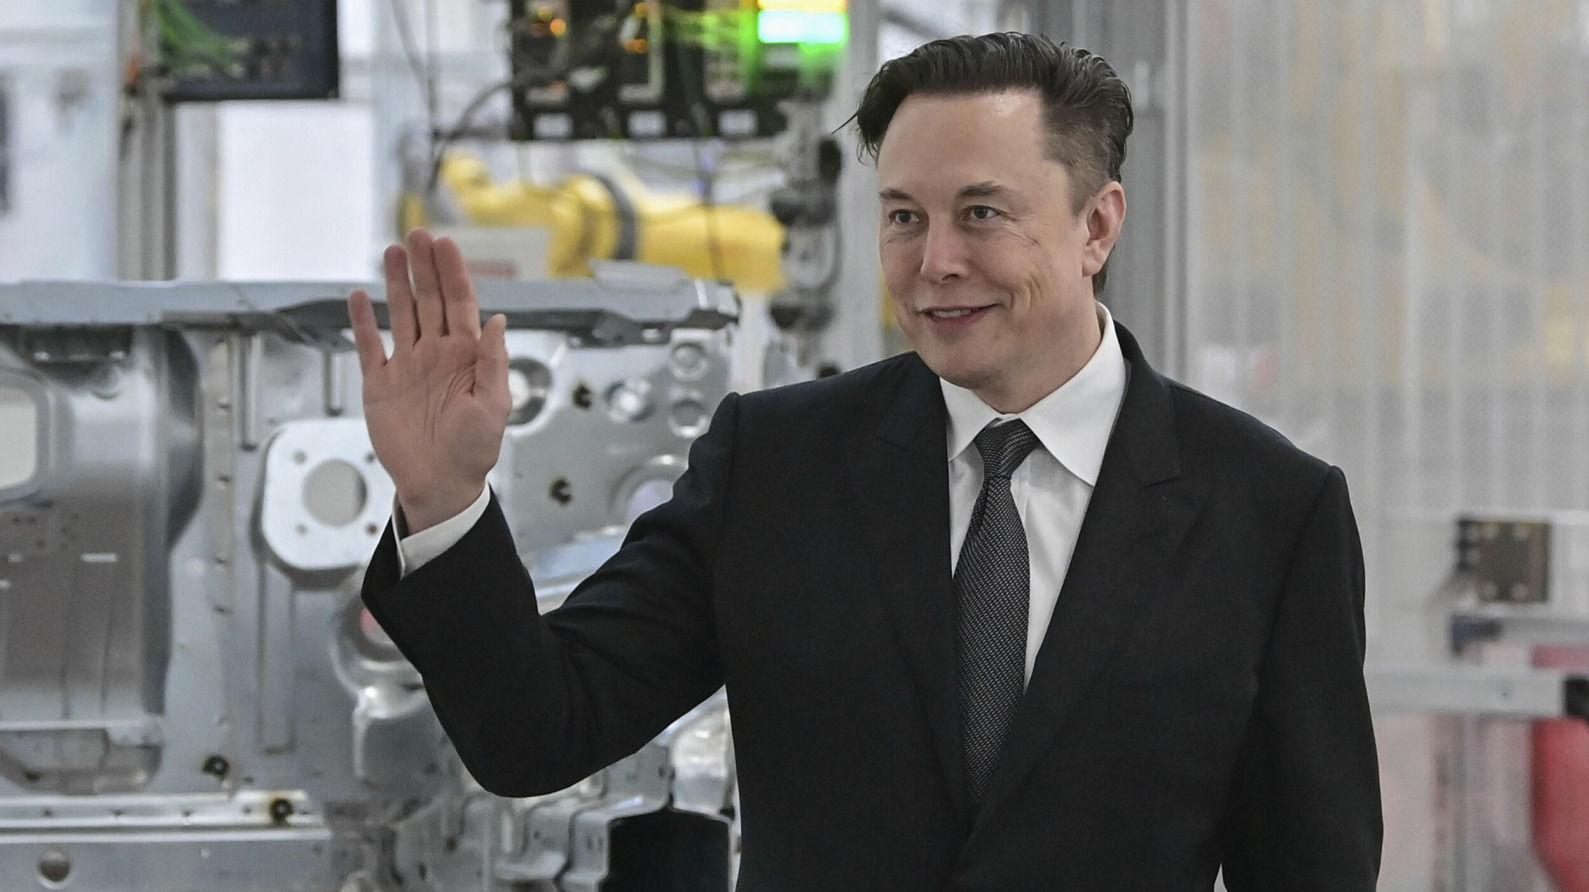 Tesla boss: Cars are 'embarrassingly expensive'